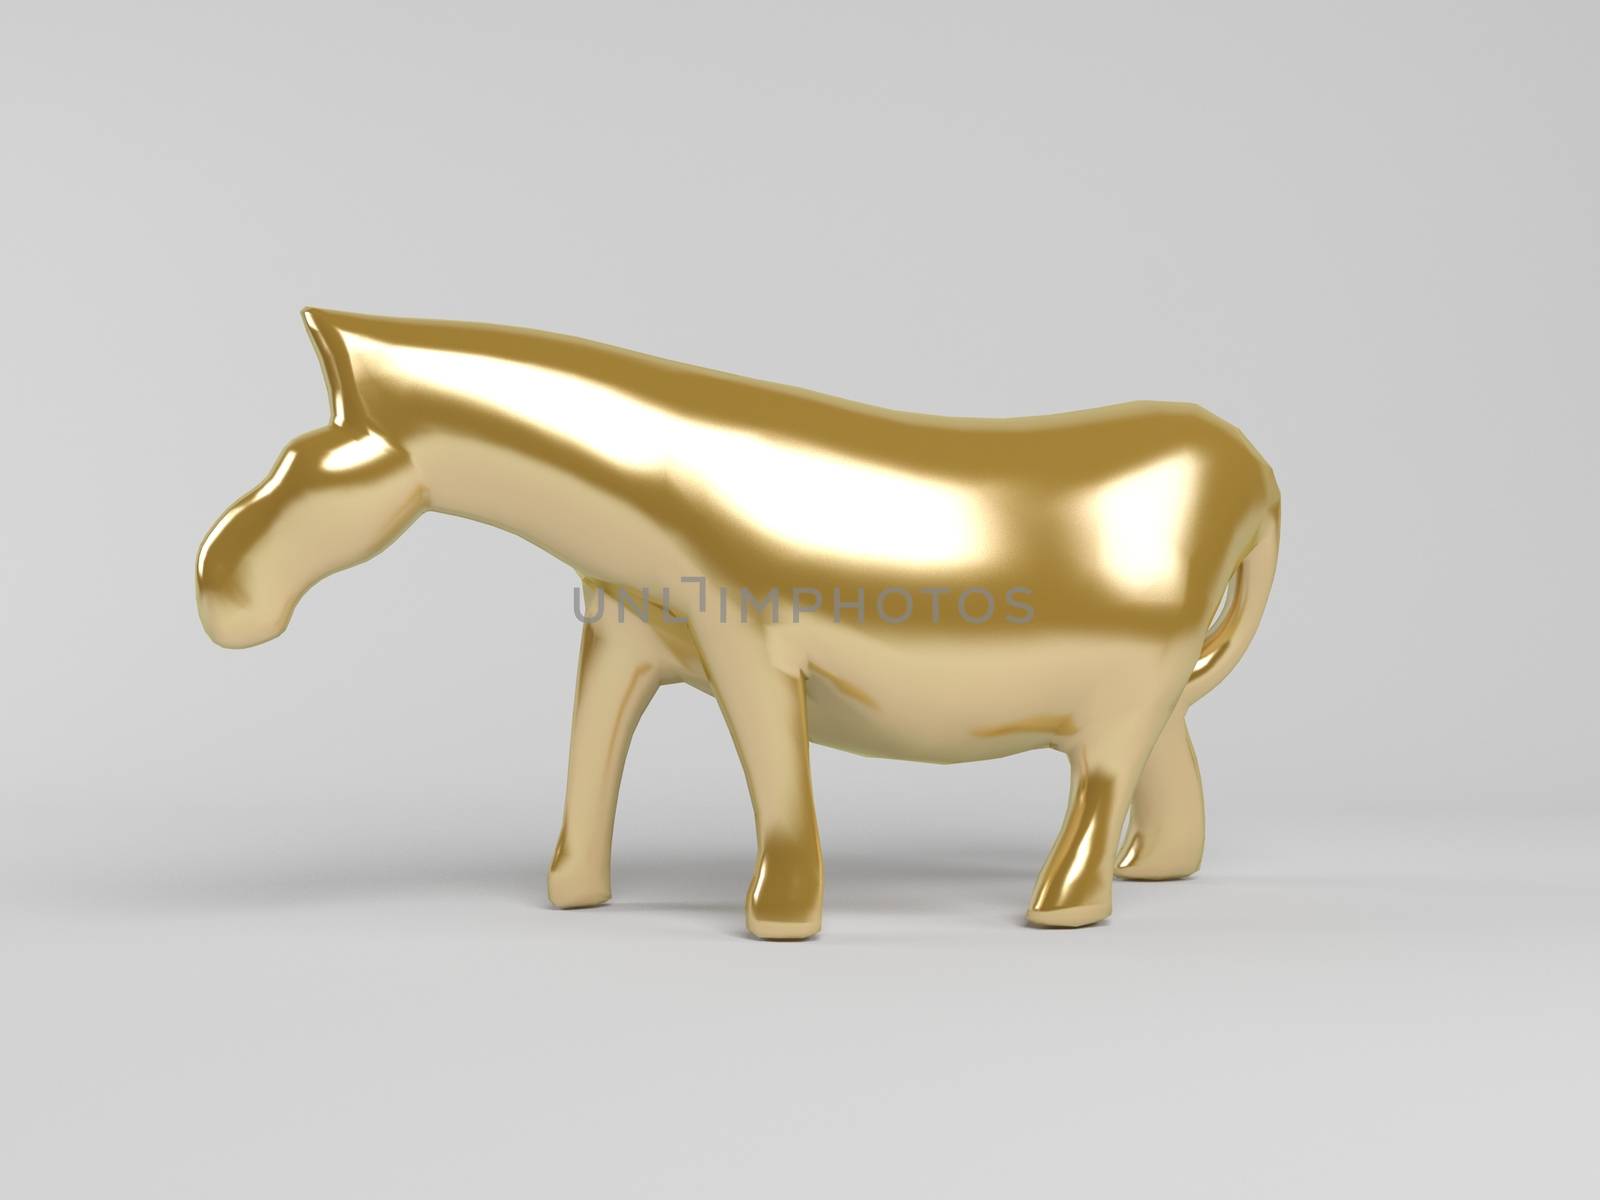 3d rendering of animal  inside a stage with high render quality to be used as a logo, medal, symbol, shape, emblem, icon, business, geometric, label or any other use. 